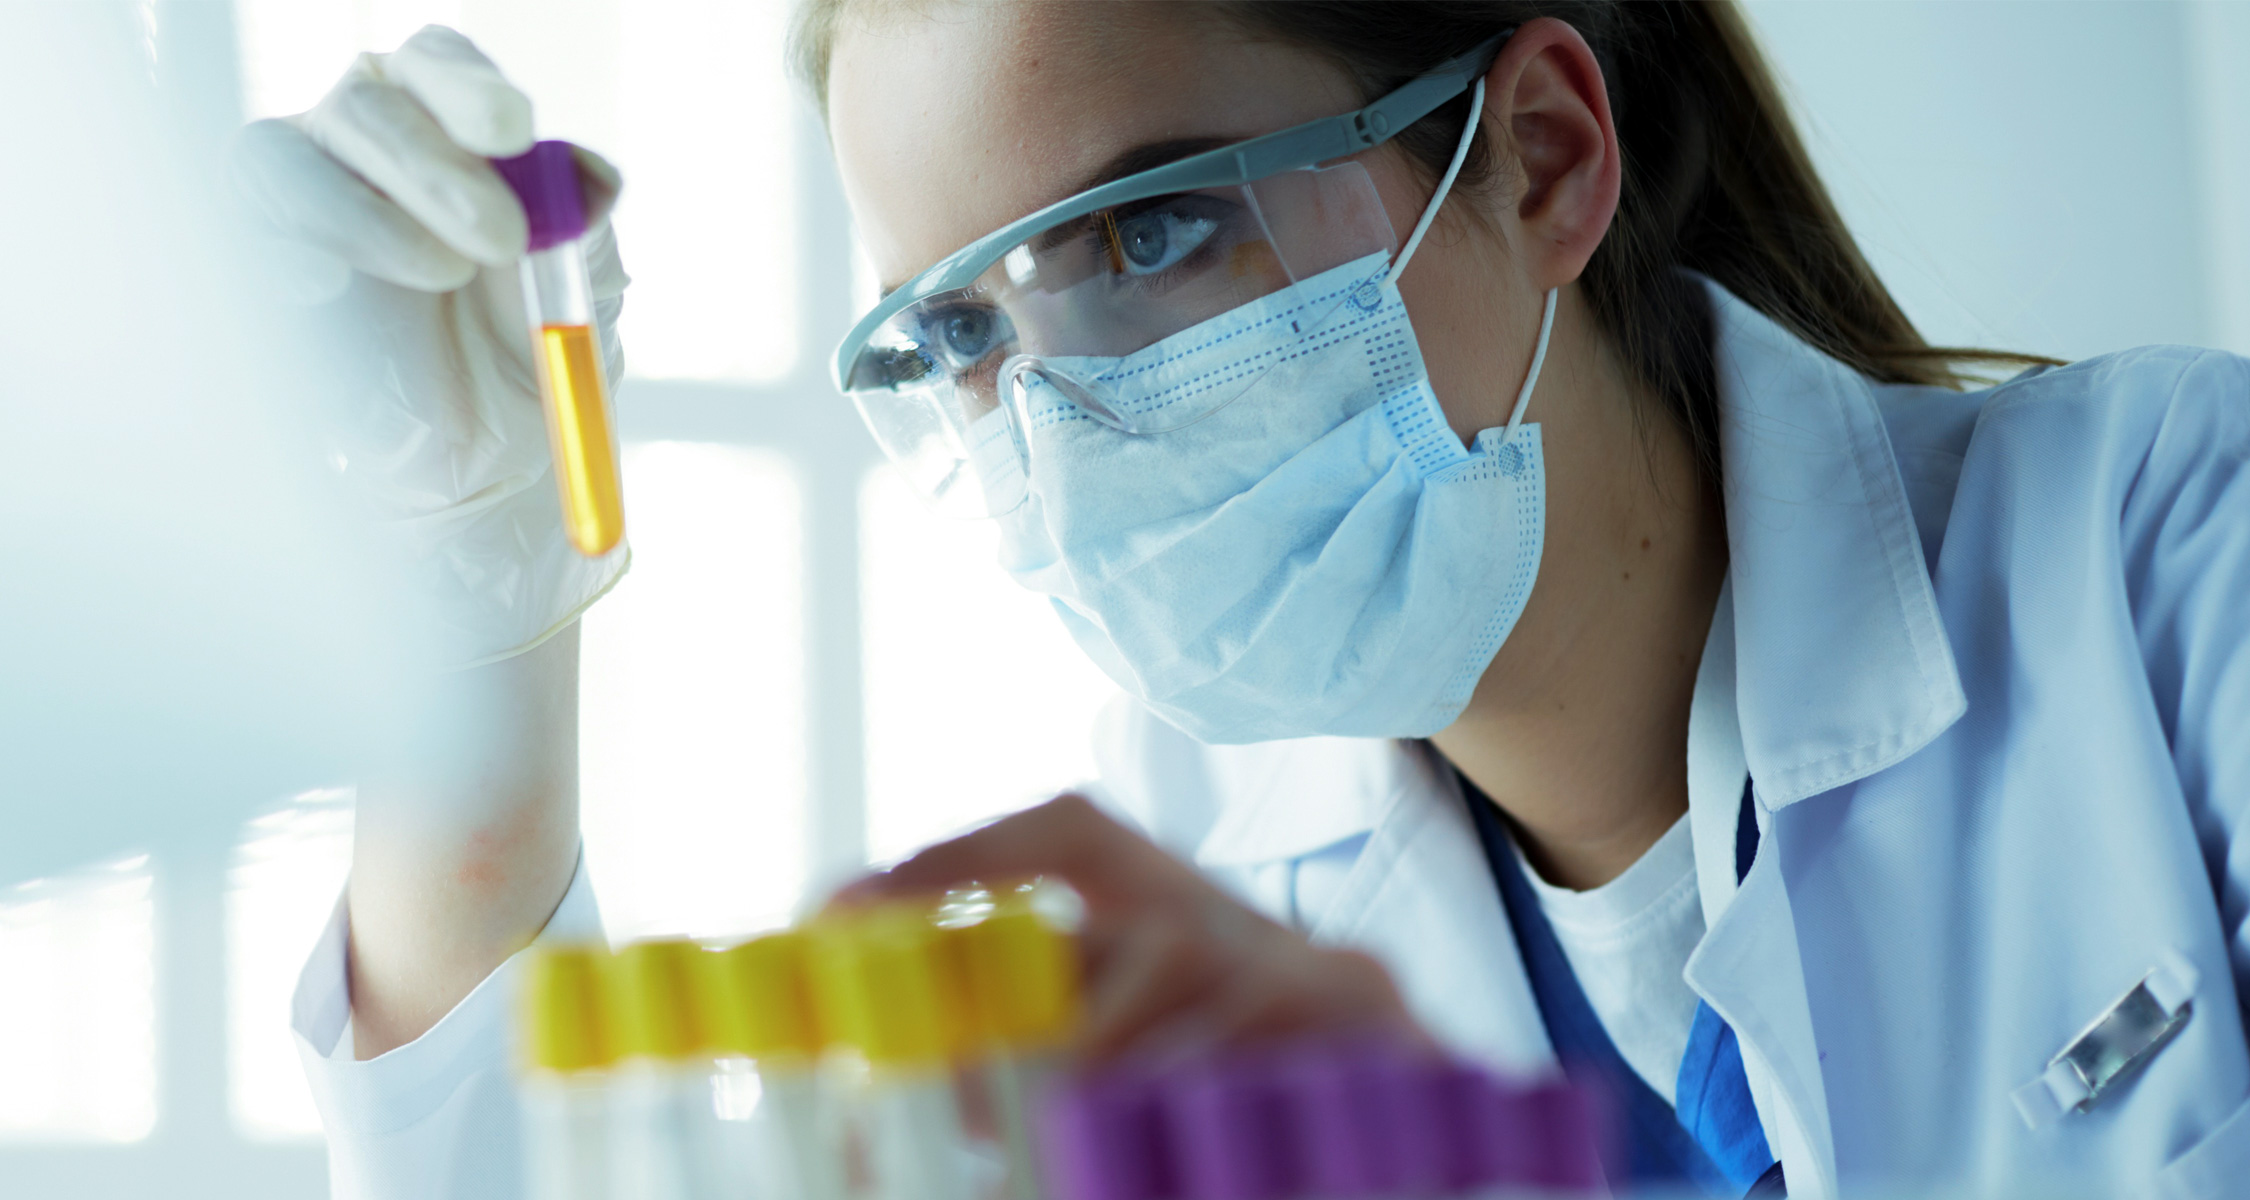 Lab technician with face mask, goggles and lab coat looks into test tube with yellow liquid.